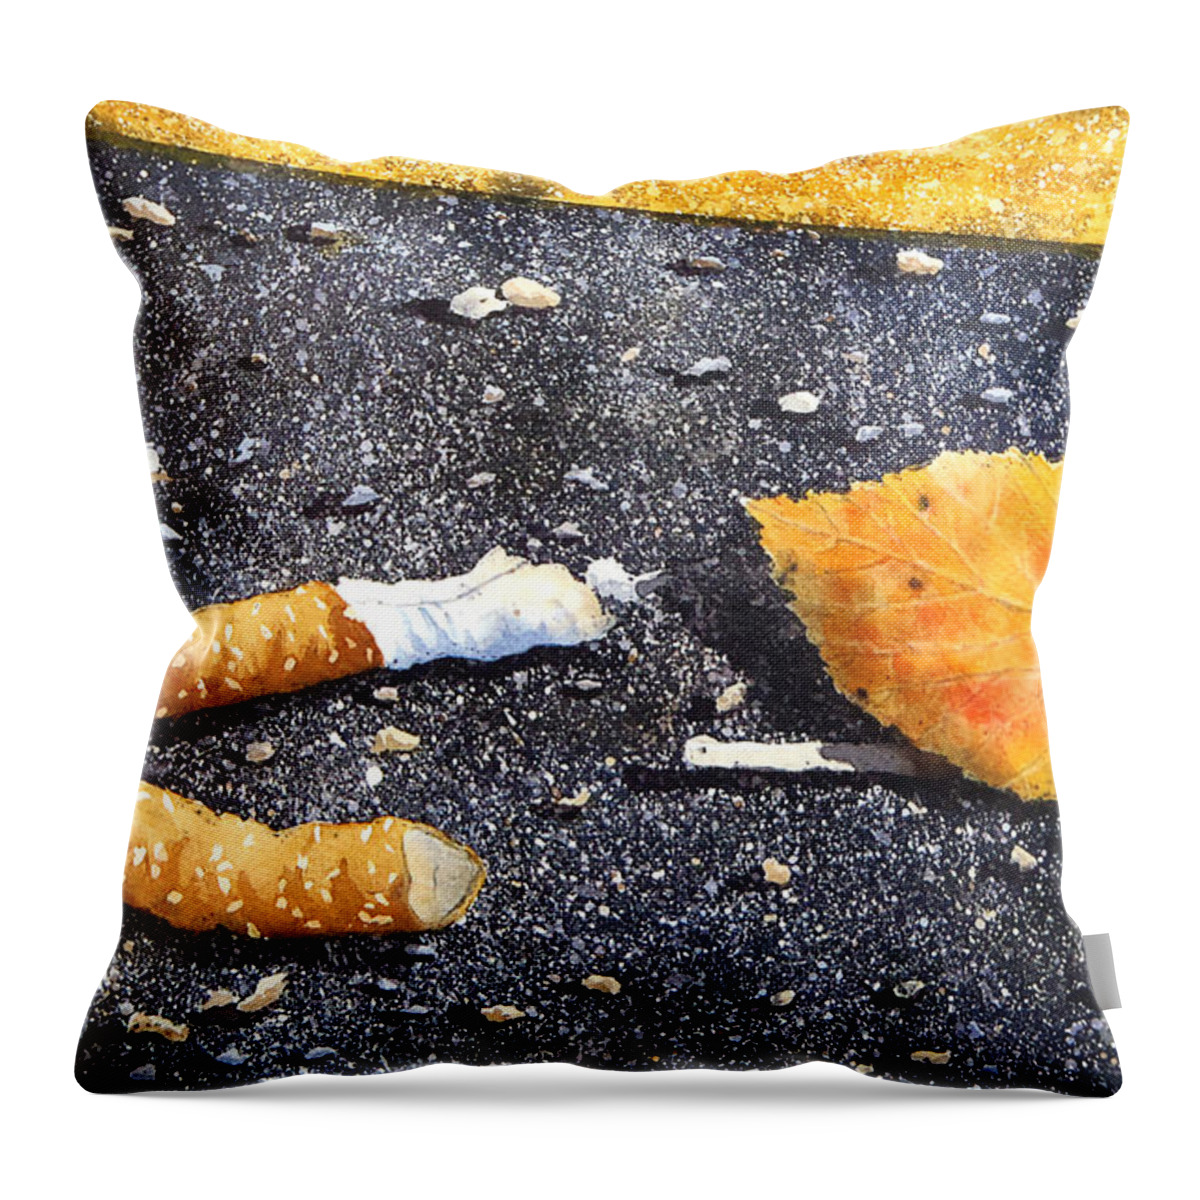 Cities Throw Pillow featuring the painting Trash by Marisa Gabetta